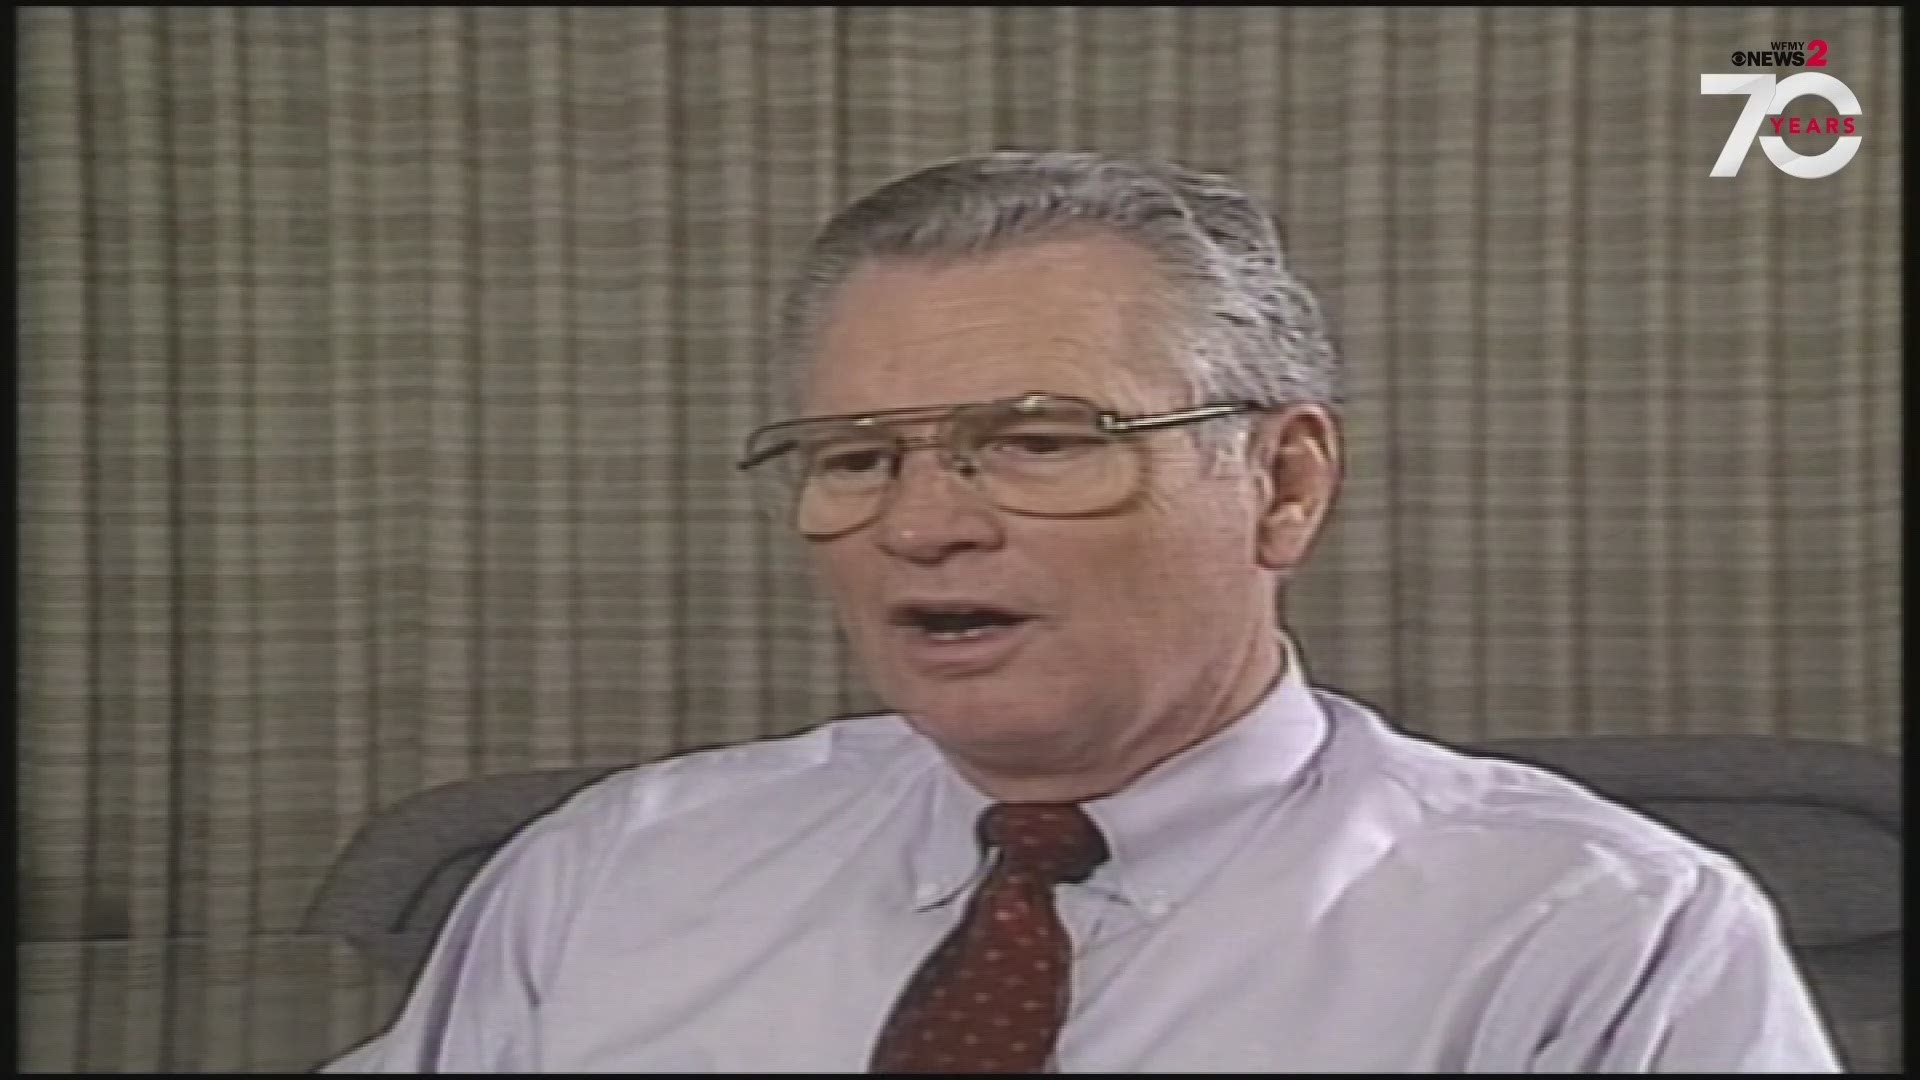 WFMY News 2 is celebrating 70 years and we’re going back in time! Late and former WFMY News 2 Anchor, Lee Kinard talks about his start in TV news. Kinard’s first day on the job was April 16, 1956 as an announcer. He was told it would be a long time before he did anything on air. However, that quickly changed and soon after he hosted, “TV Matinee.” Join the conversation on Twitter using the #WFMY70 to share your own memories of WFMY News 2.